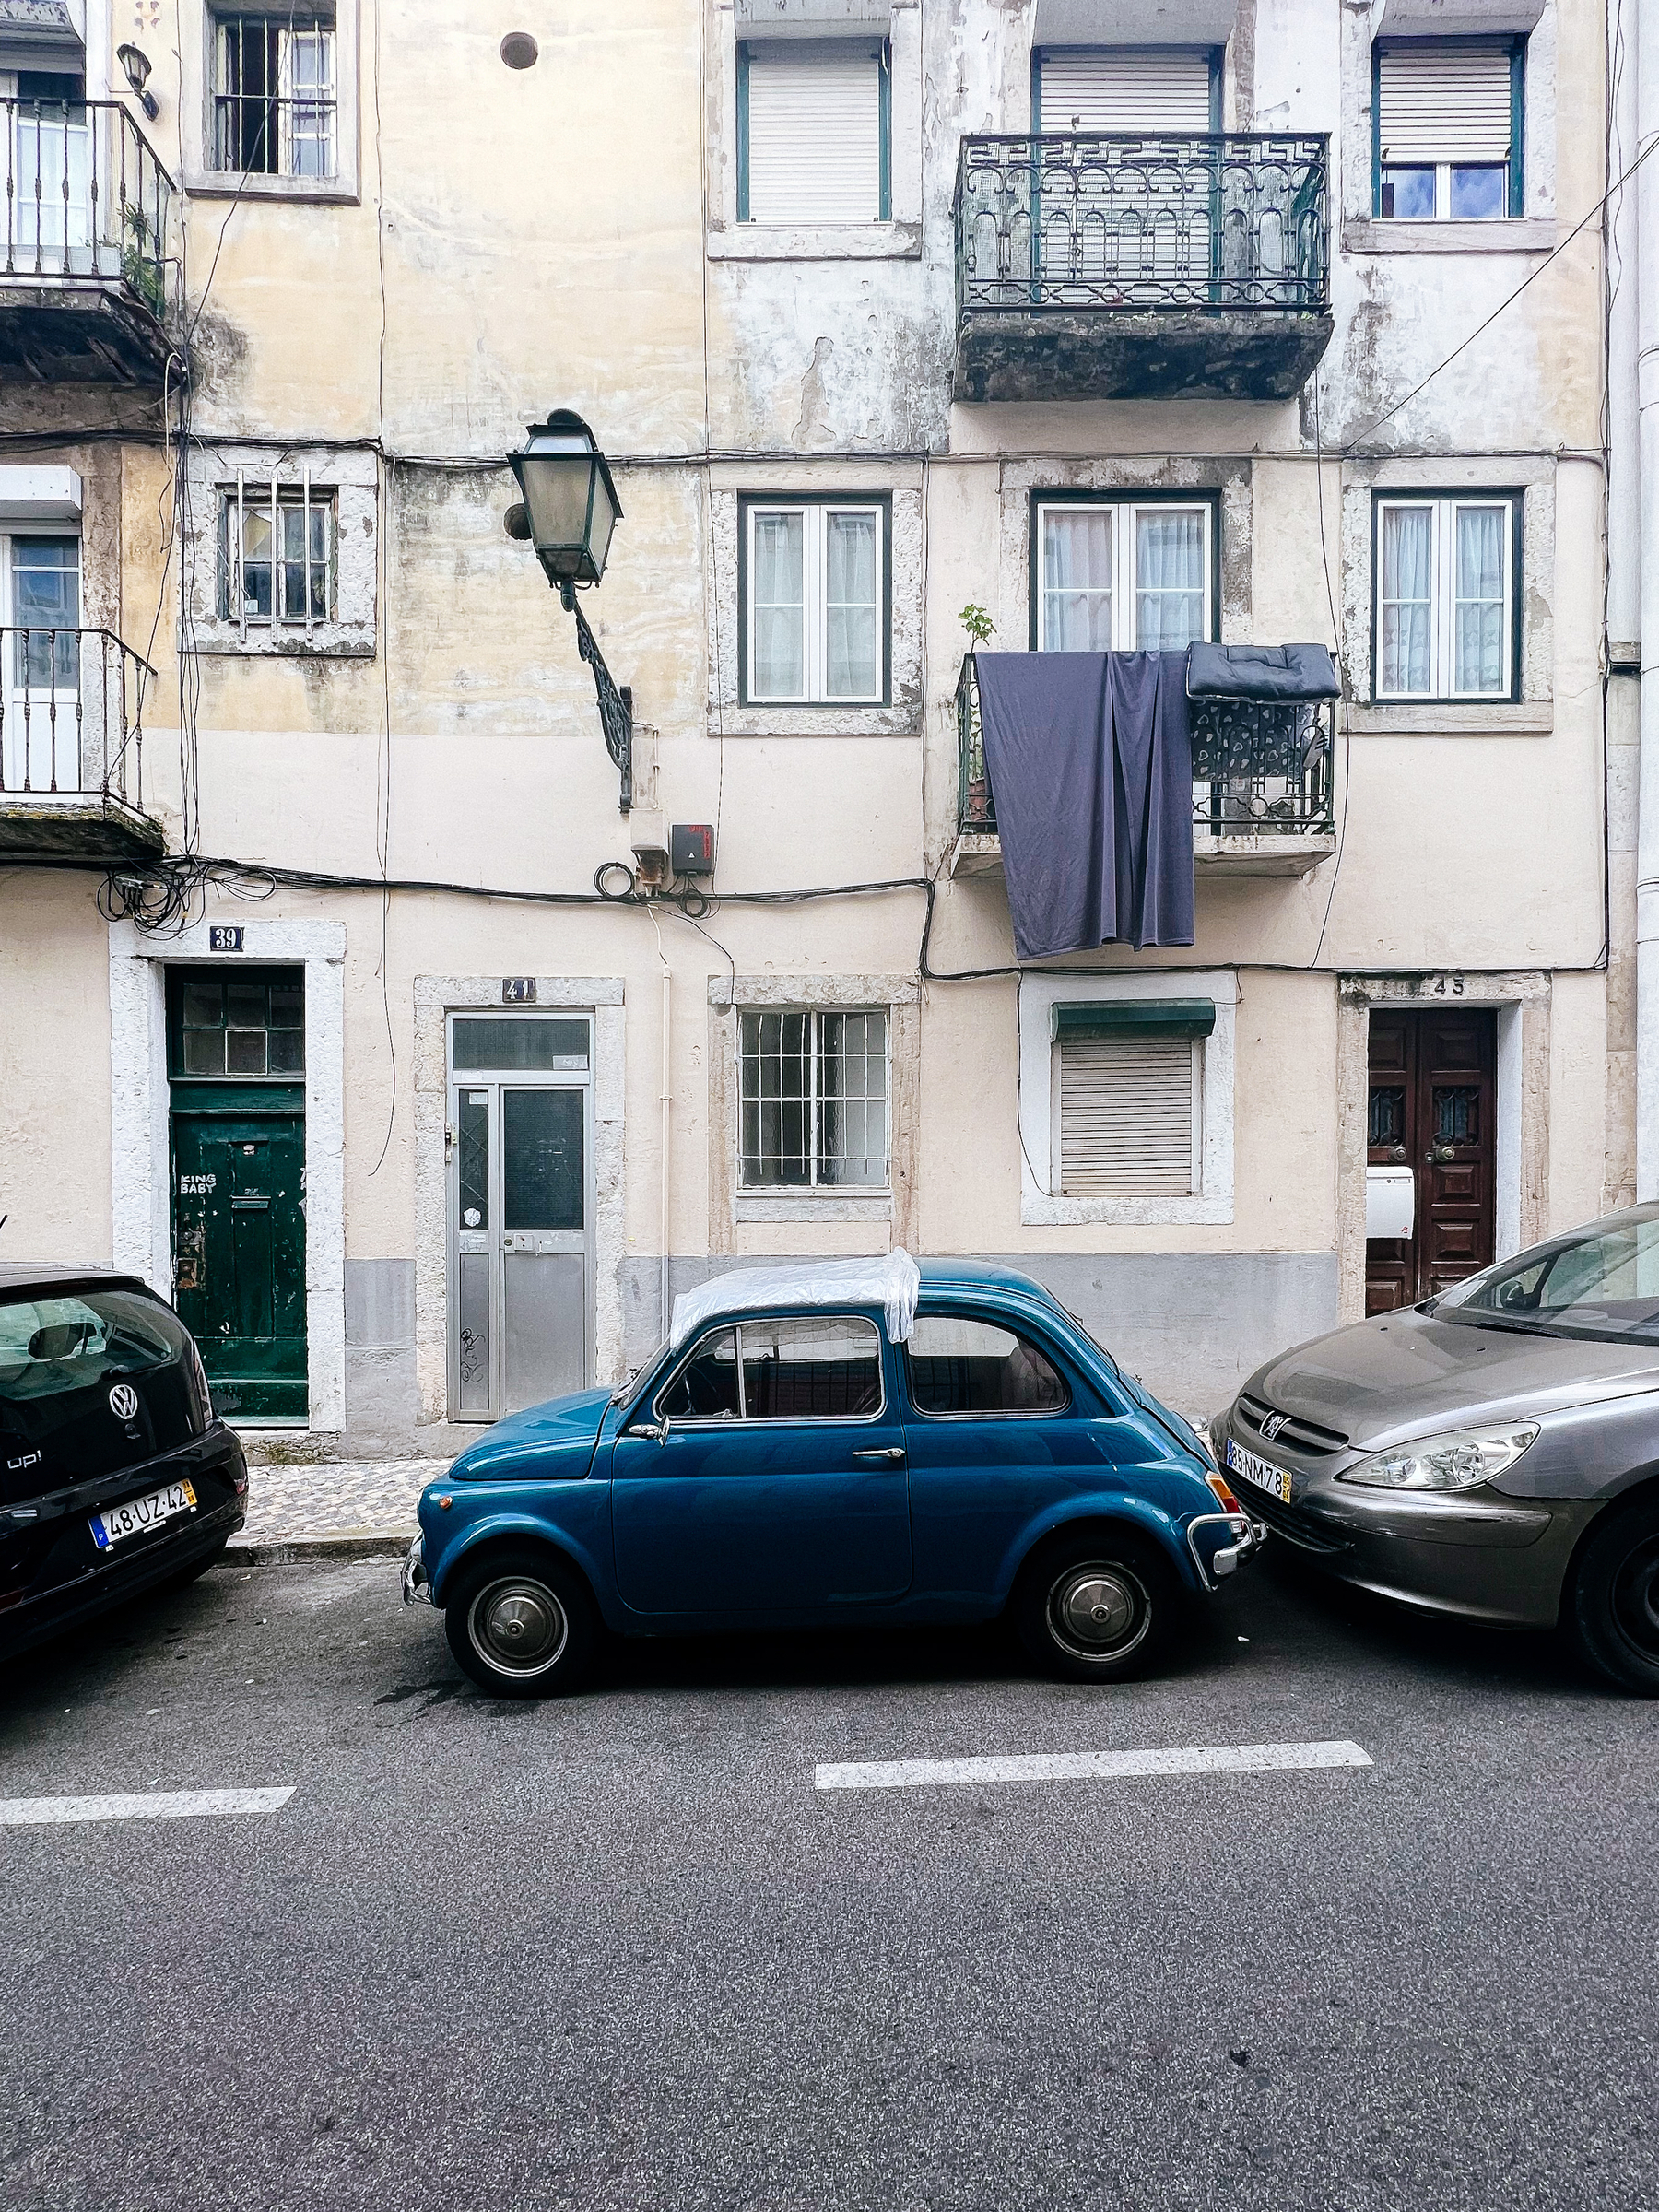 a very small car is park in front of a old building.